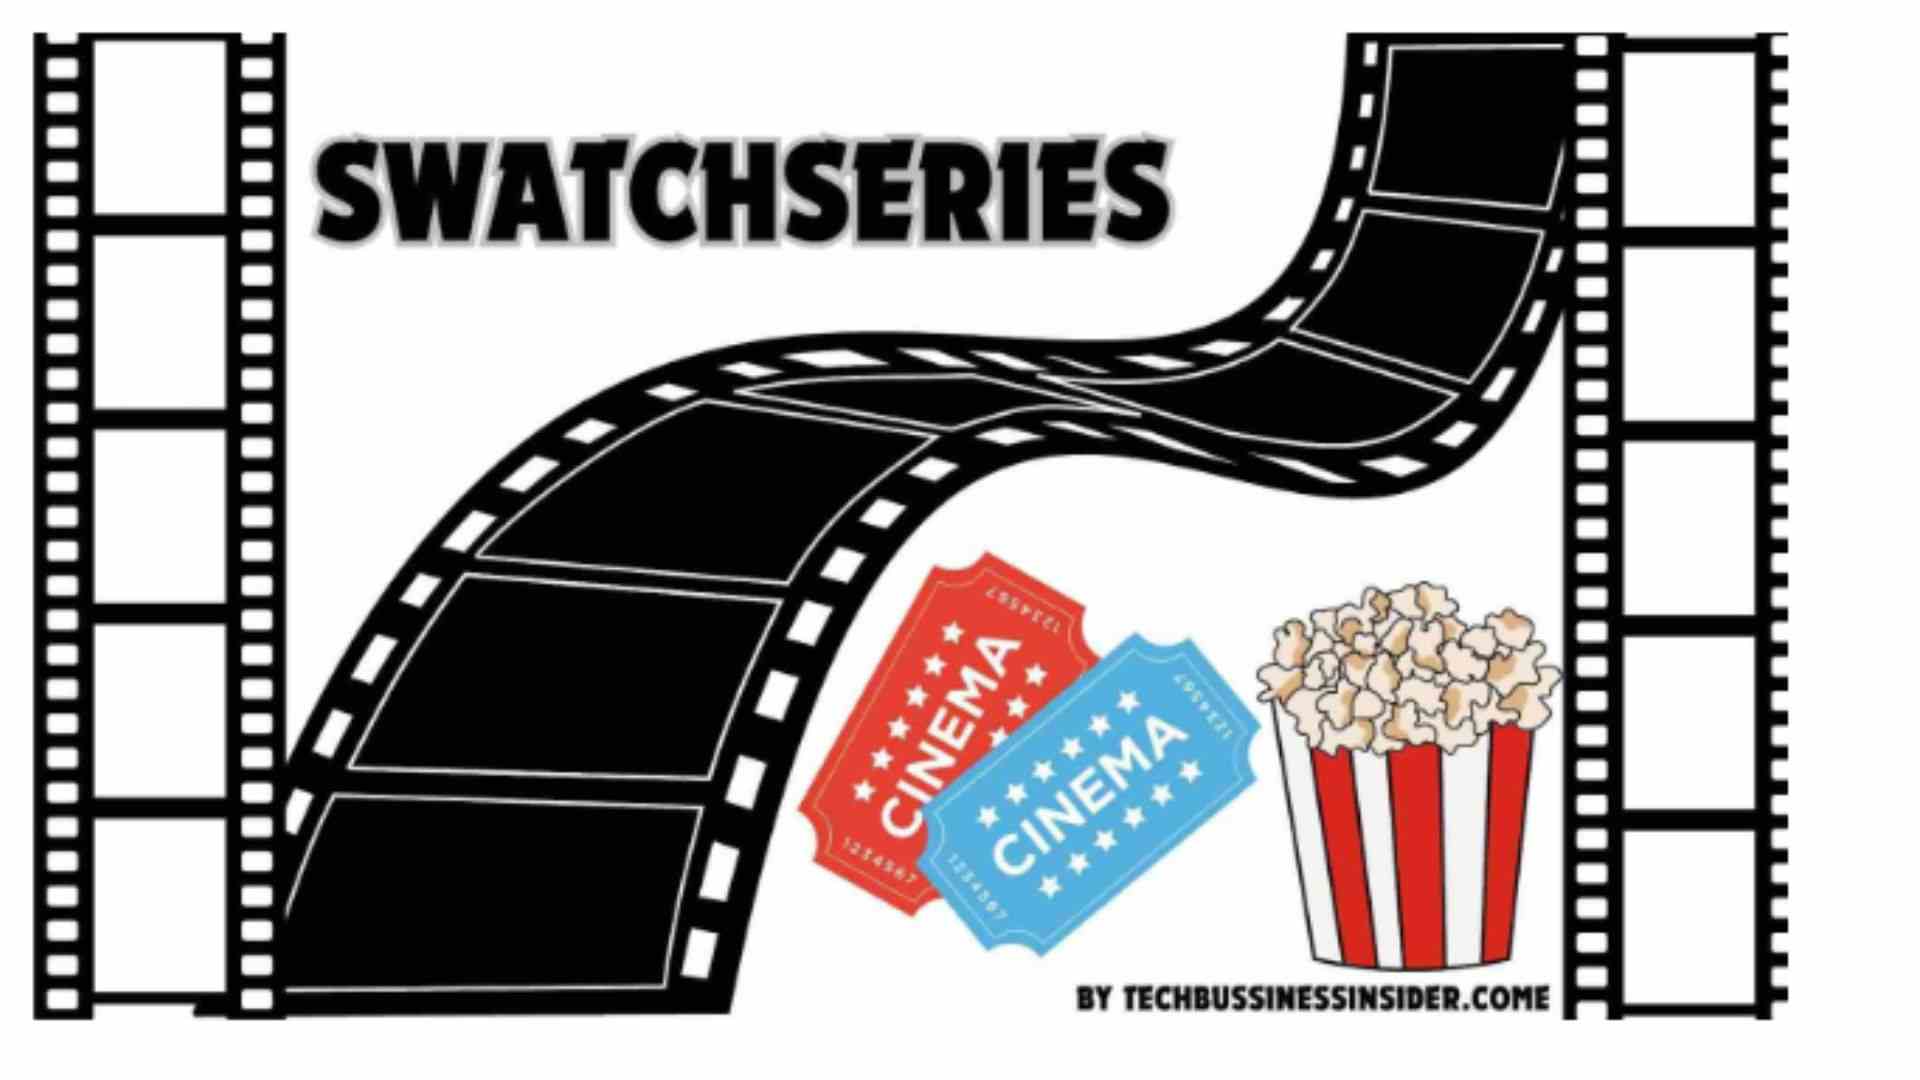 SwatchSeries: Guide to Free HD Movie Downloads